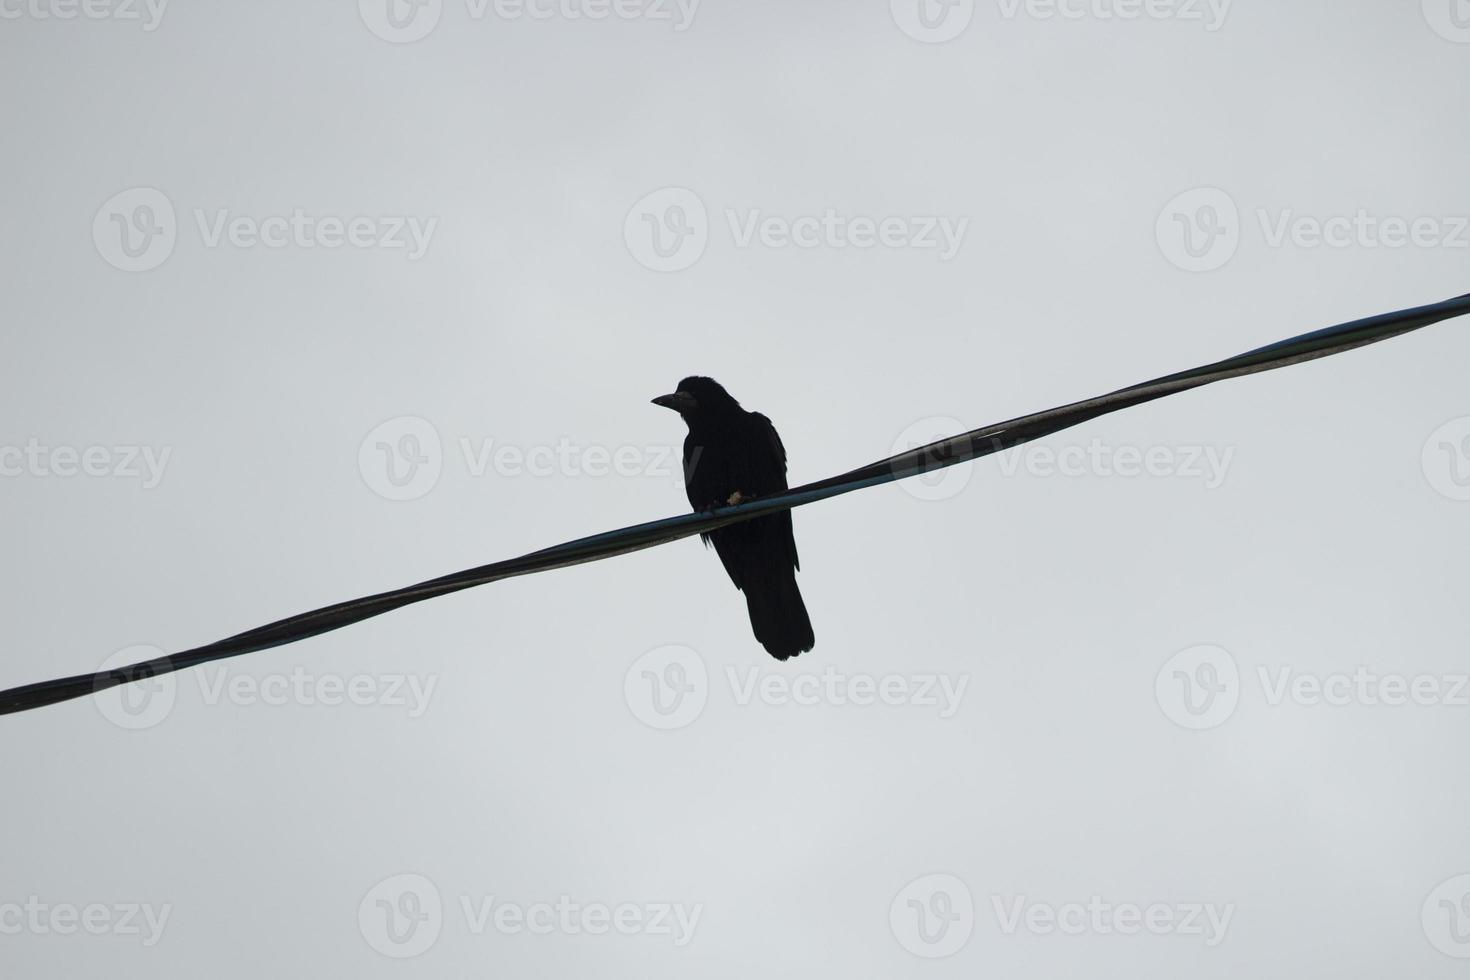 Silhouette of one bird sitting on wire. Bird in city. Wire against background of gray sky. photo